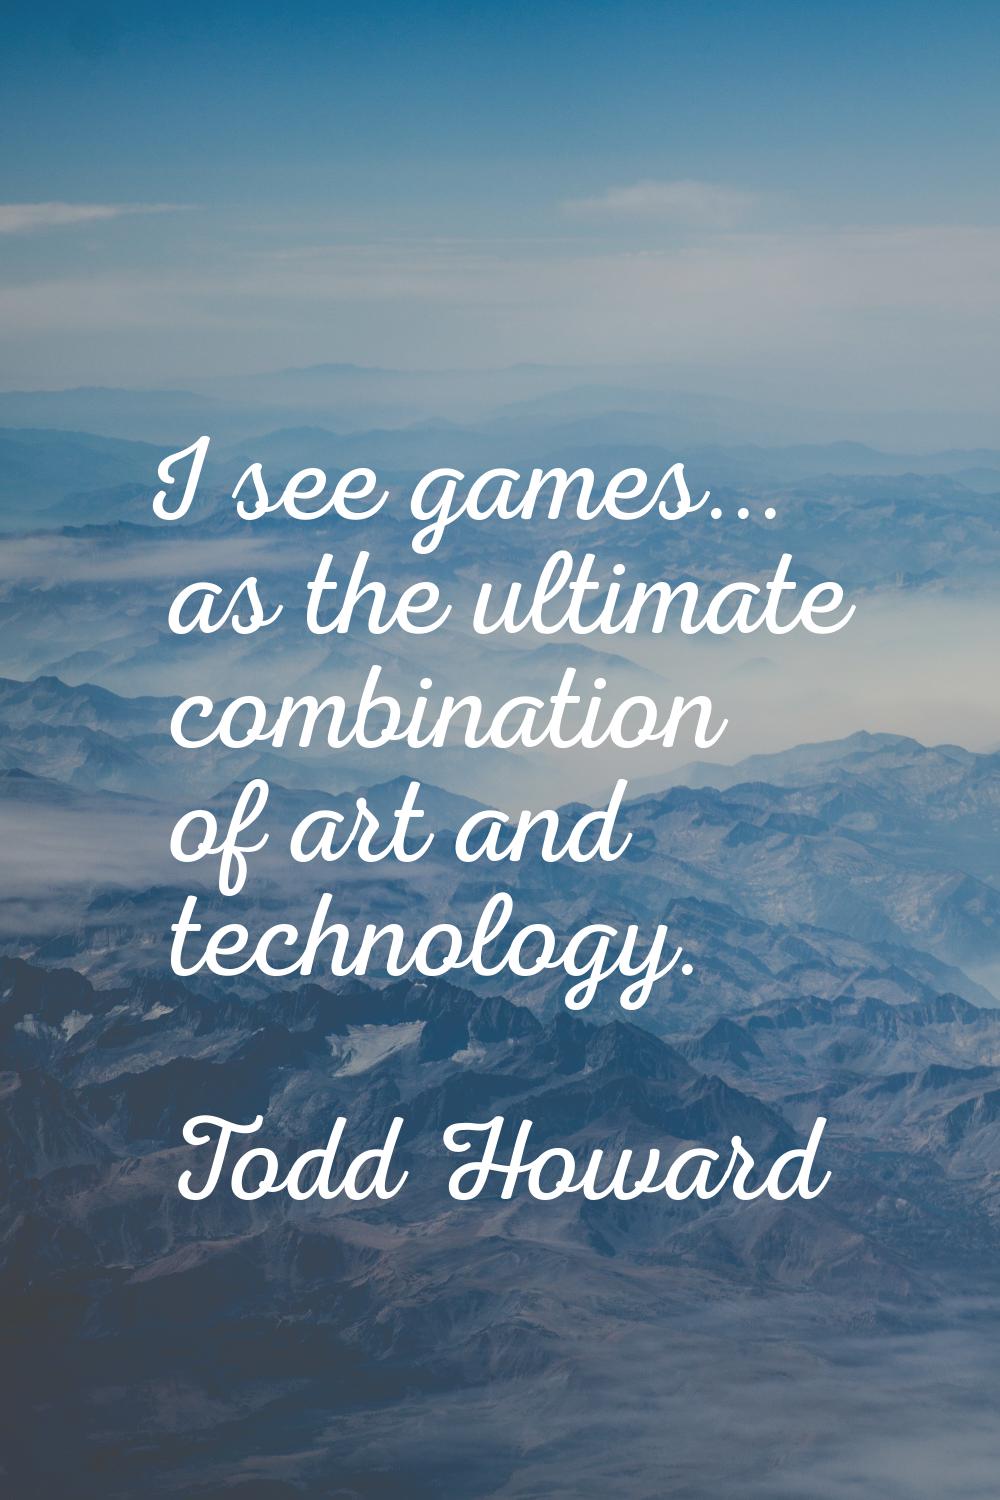 I see games... as the ultimate combination of art and technology.